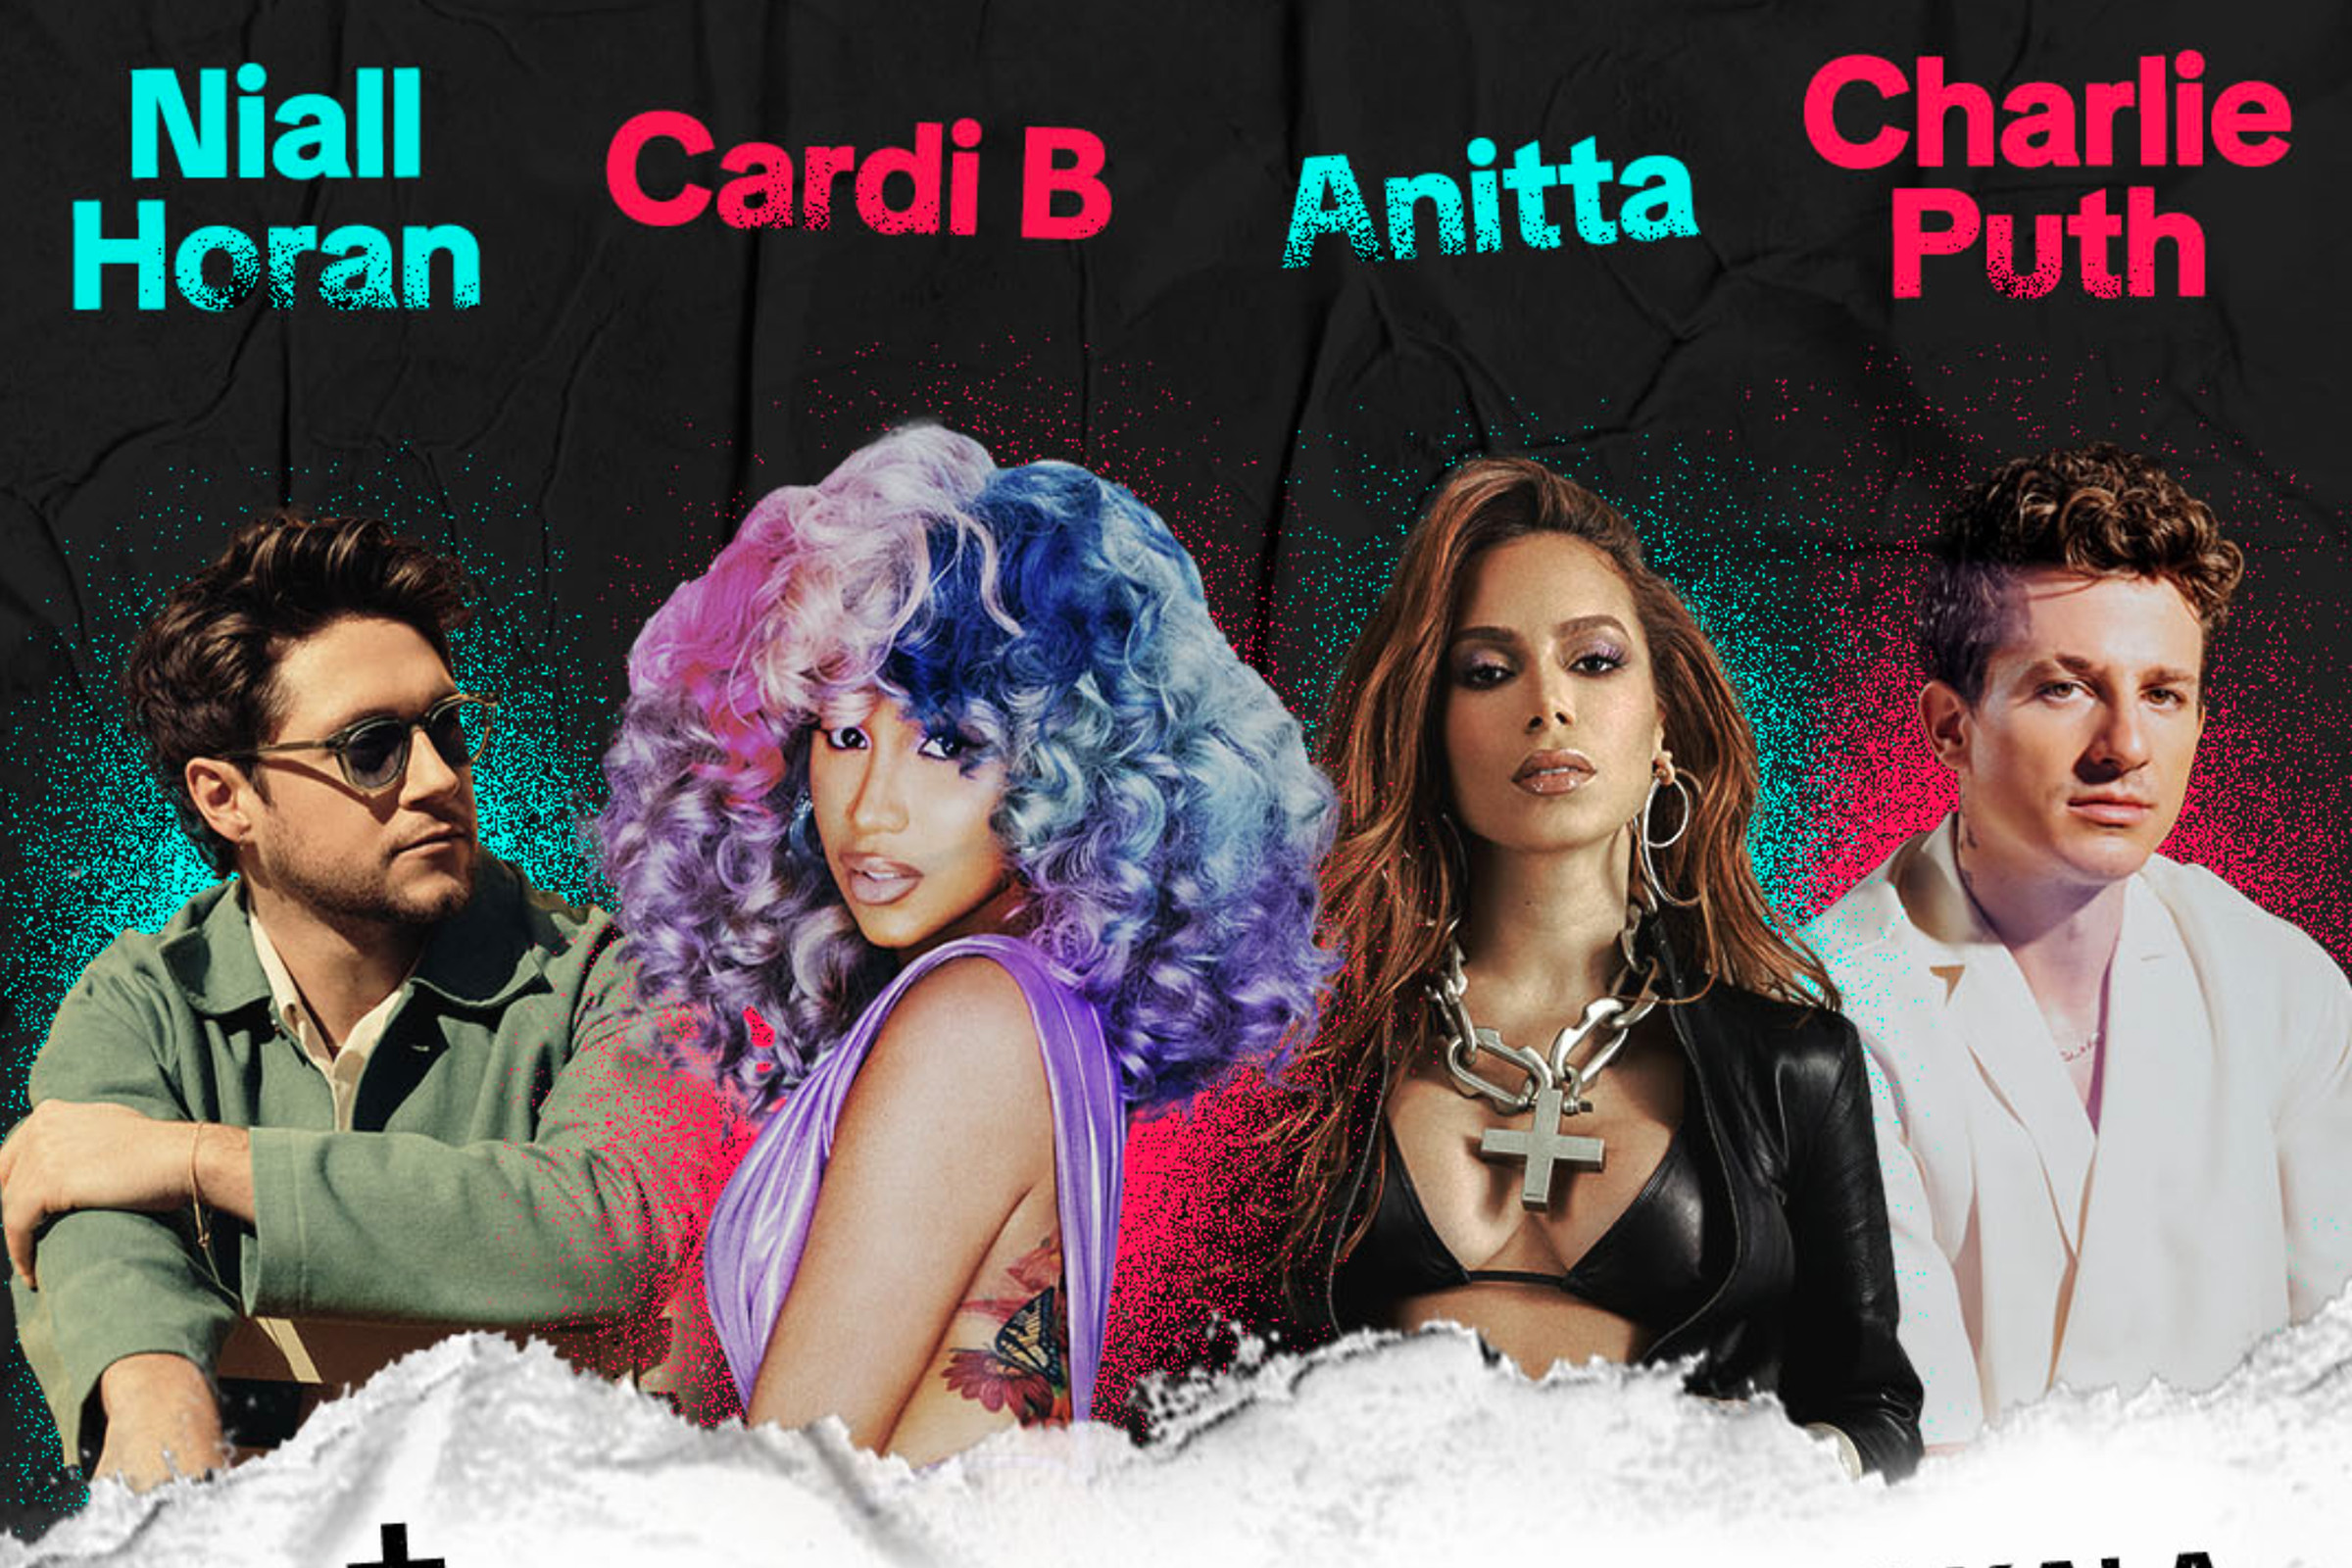 A promotional poster for the TikTok in the Mix music festival, with Niall Horan, Cardi B, Anita, and Charlie Puth showcased.